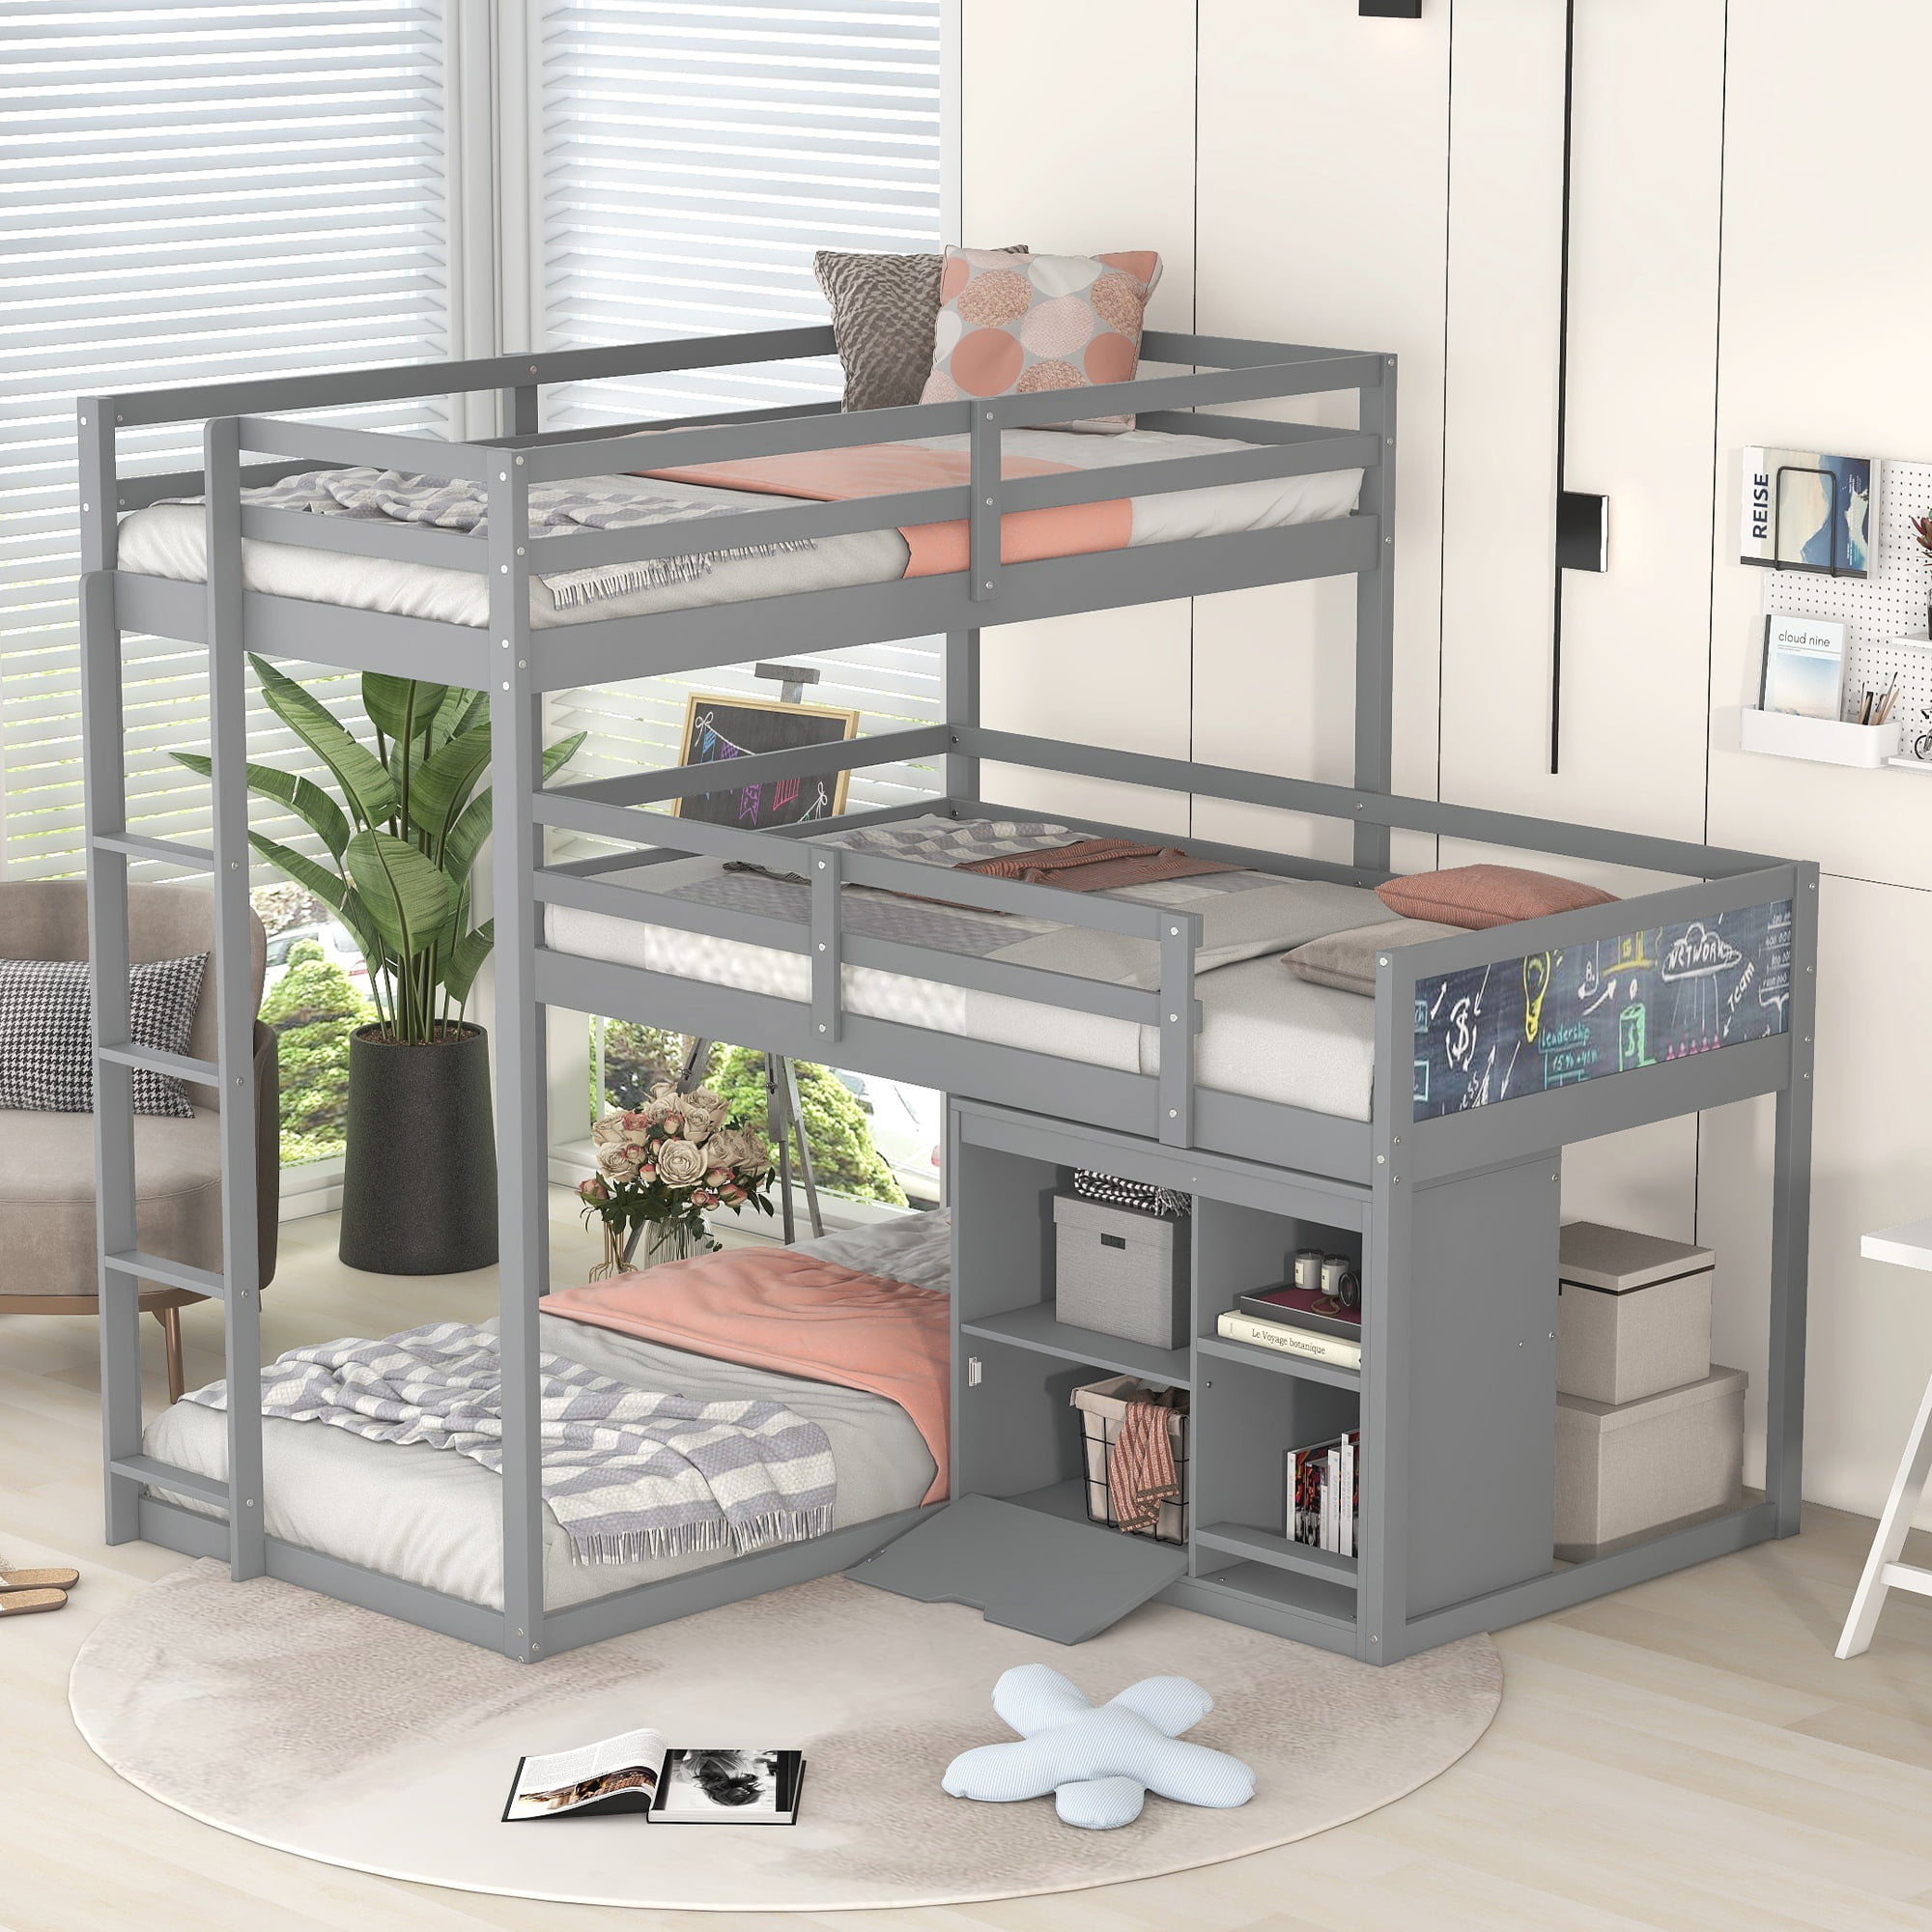 L-Shaped Wood Triple Twin Size Bunk Bed With Storage Cabinet, Blackboard, And Ladder